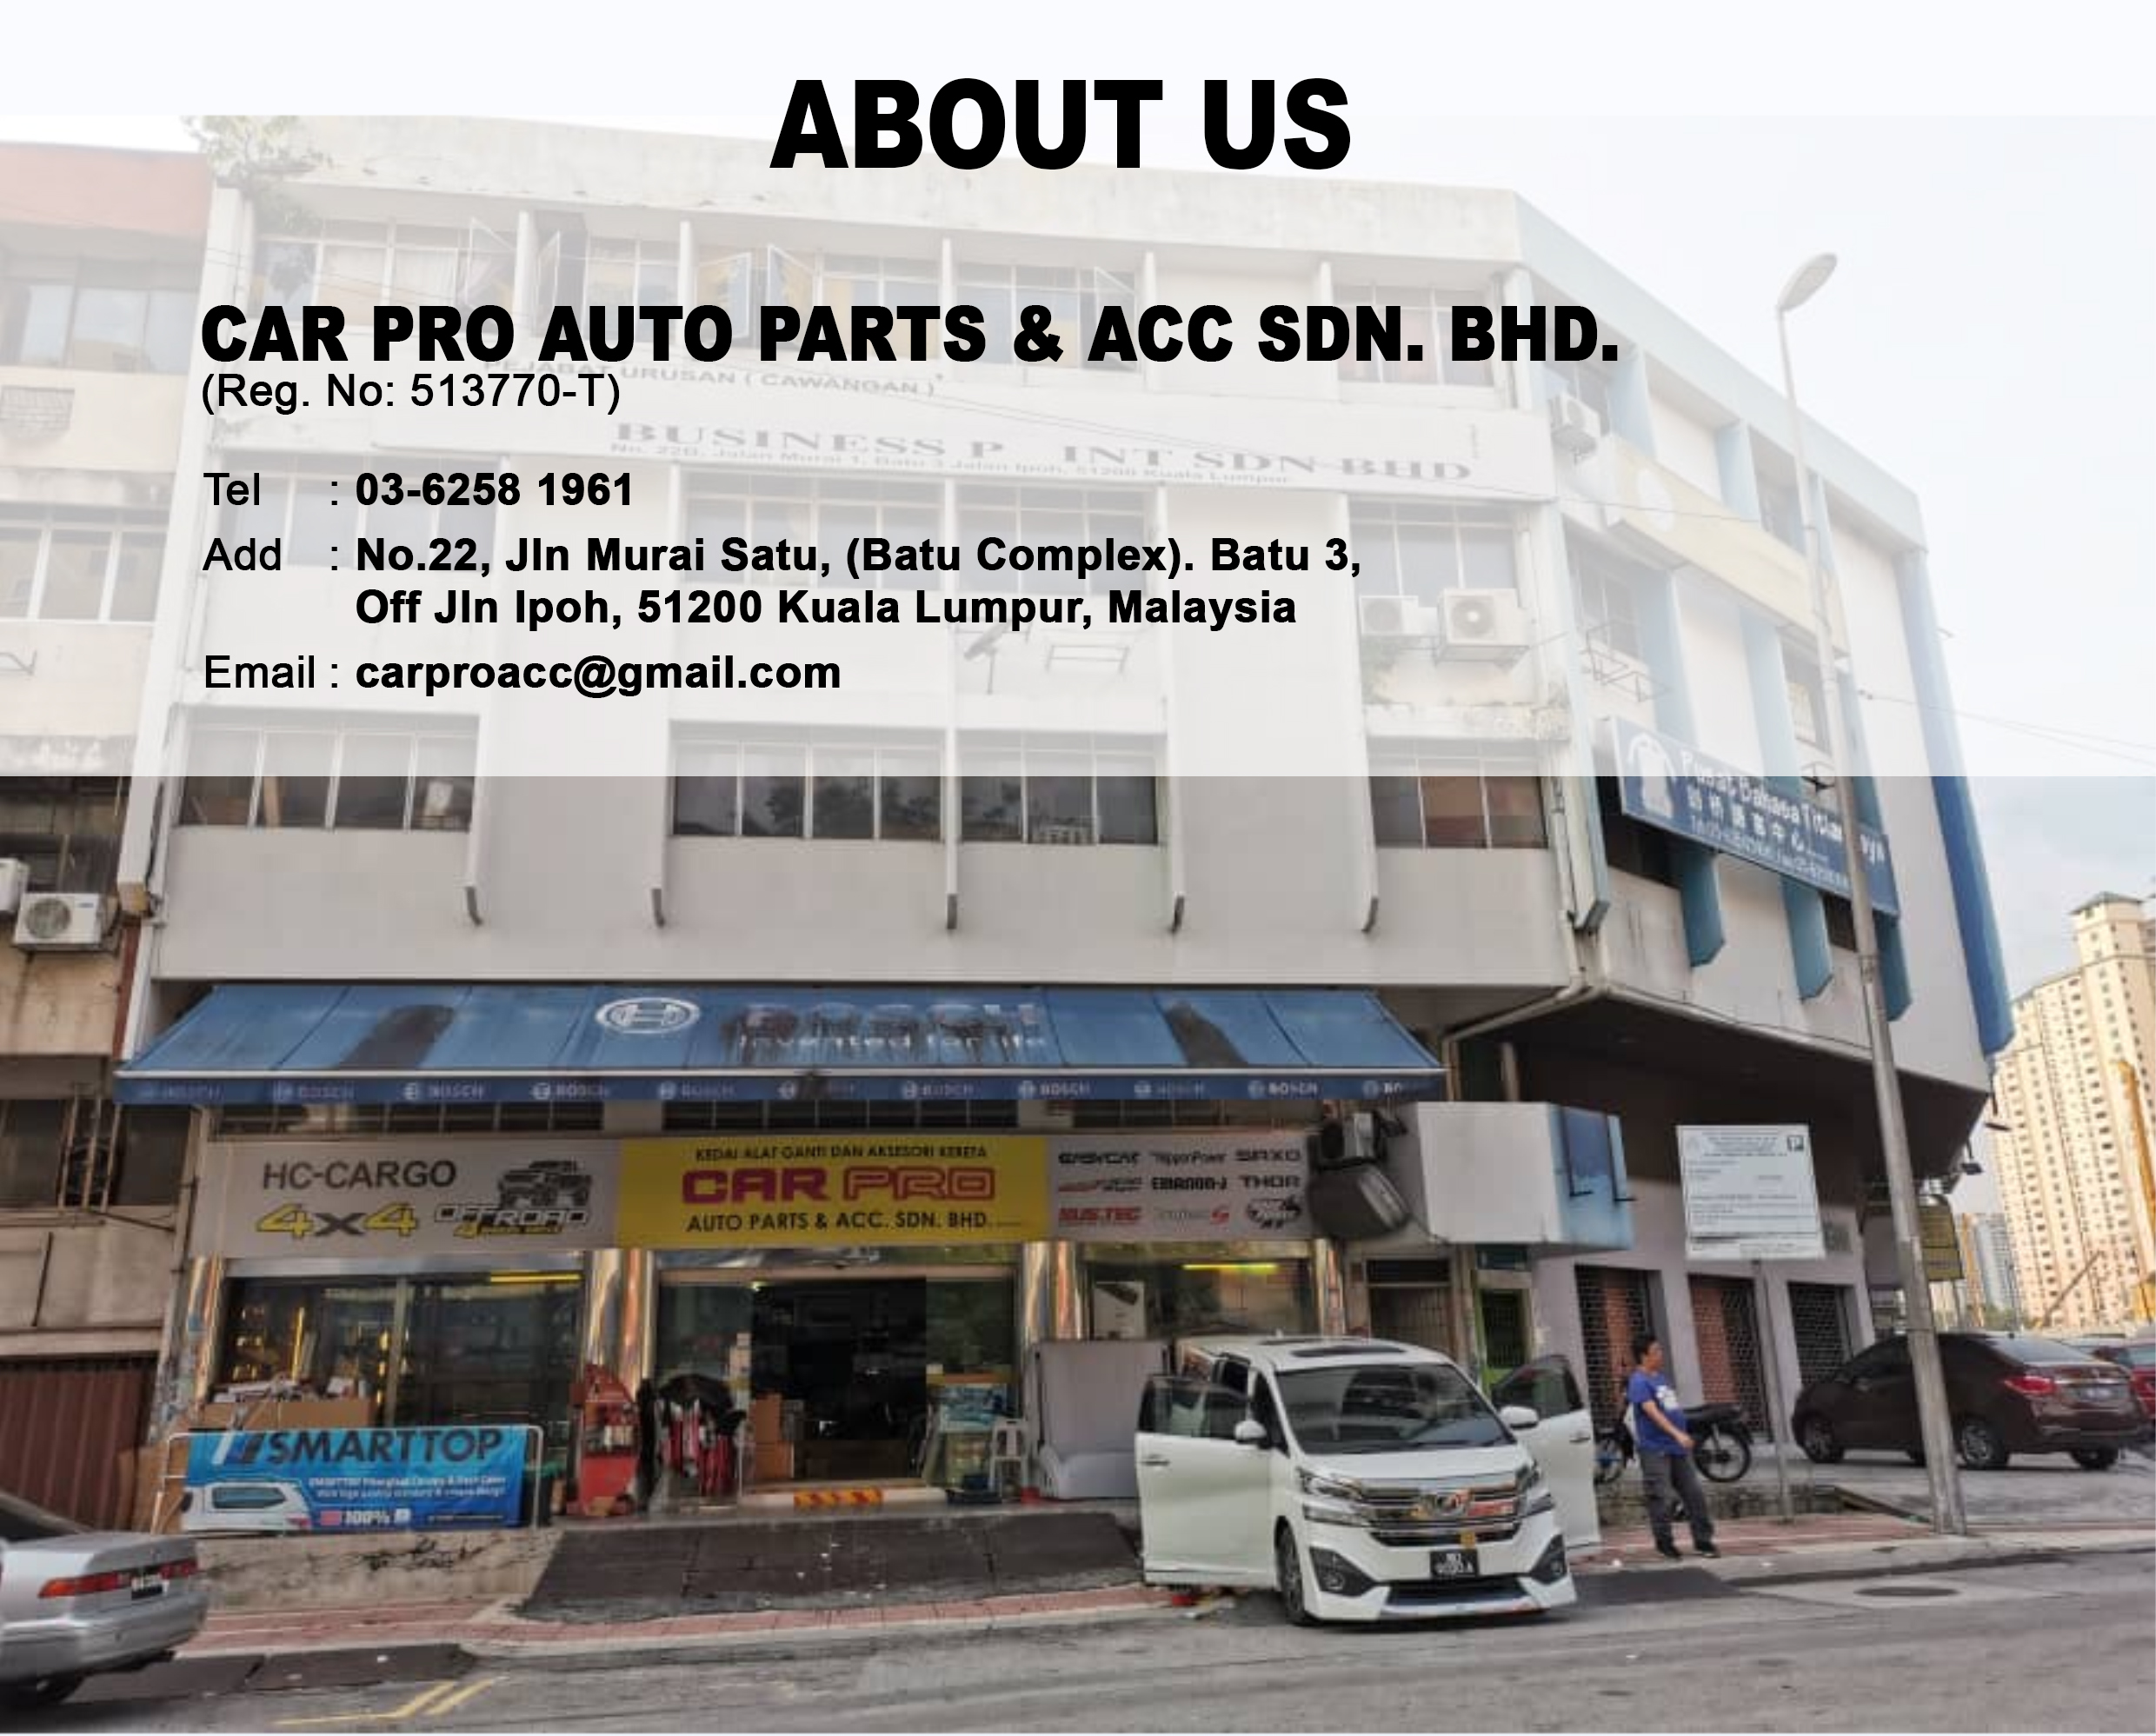 CAR PRO AUTO PARTS & ACCESSORIES SDN. BHD  About Us